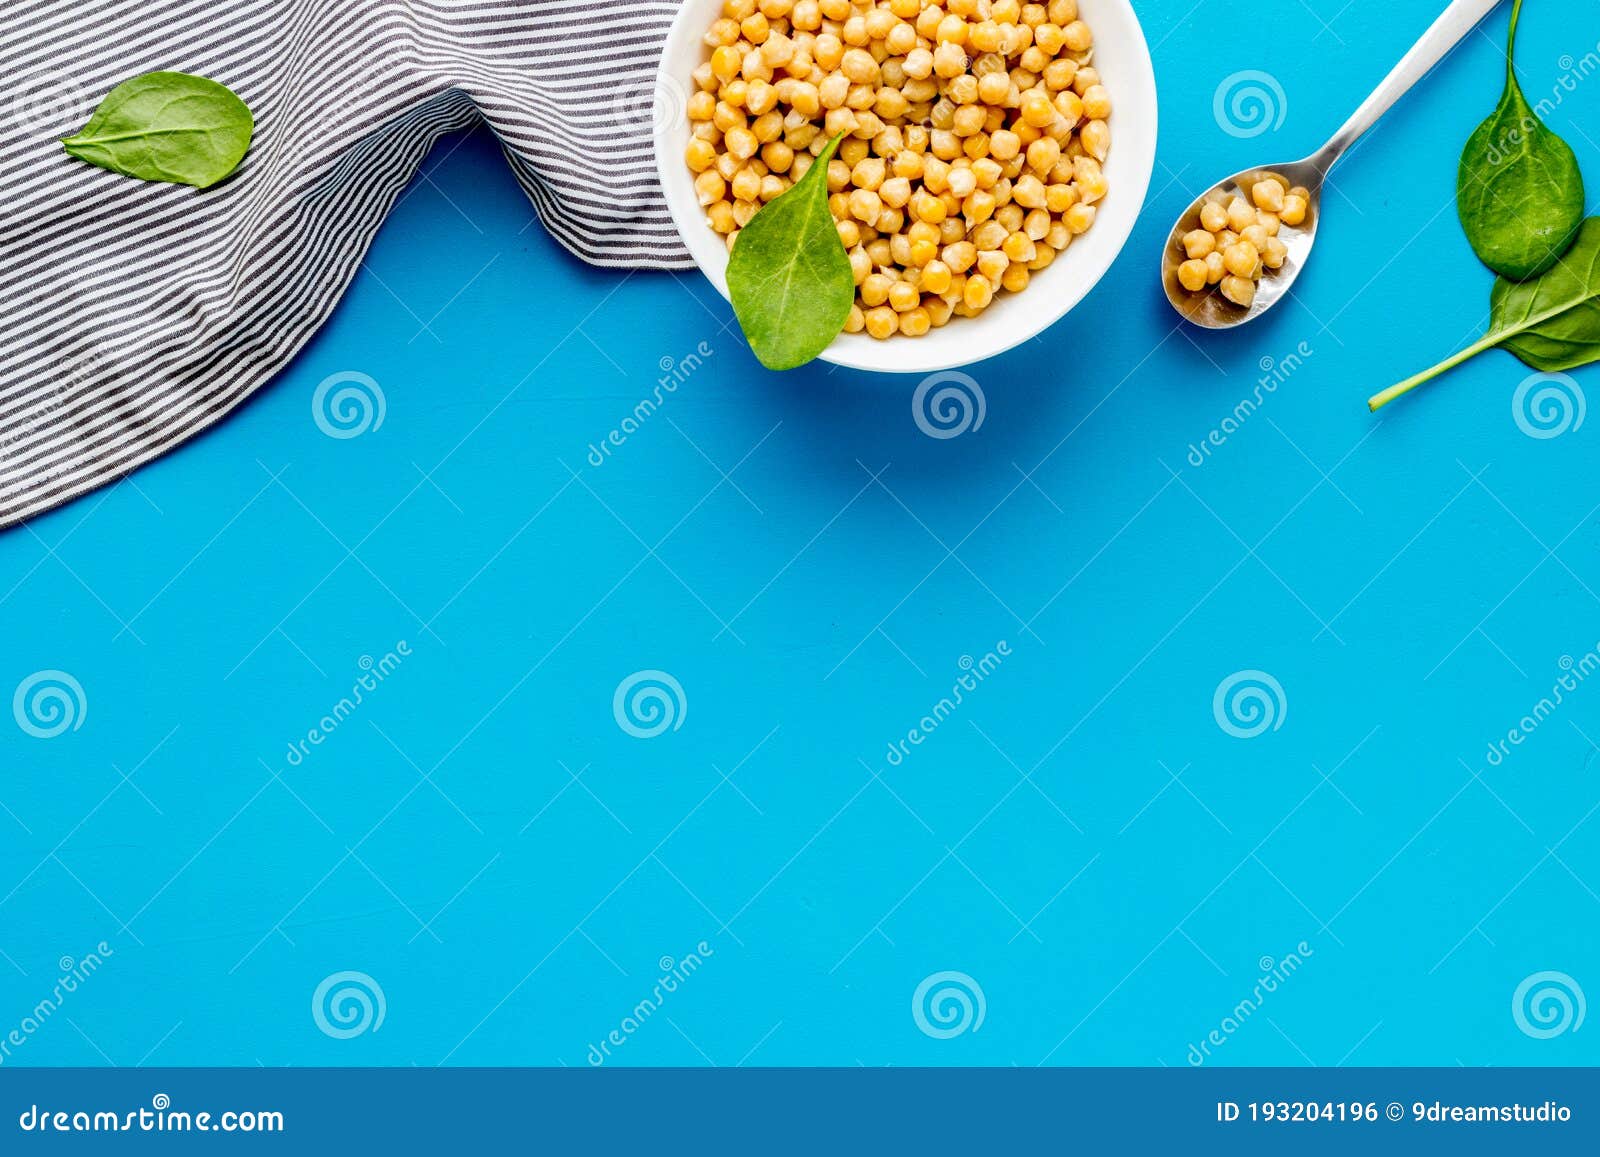 Chickpeas dishes. Vegan healthy food on blue desk top view copy space